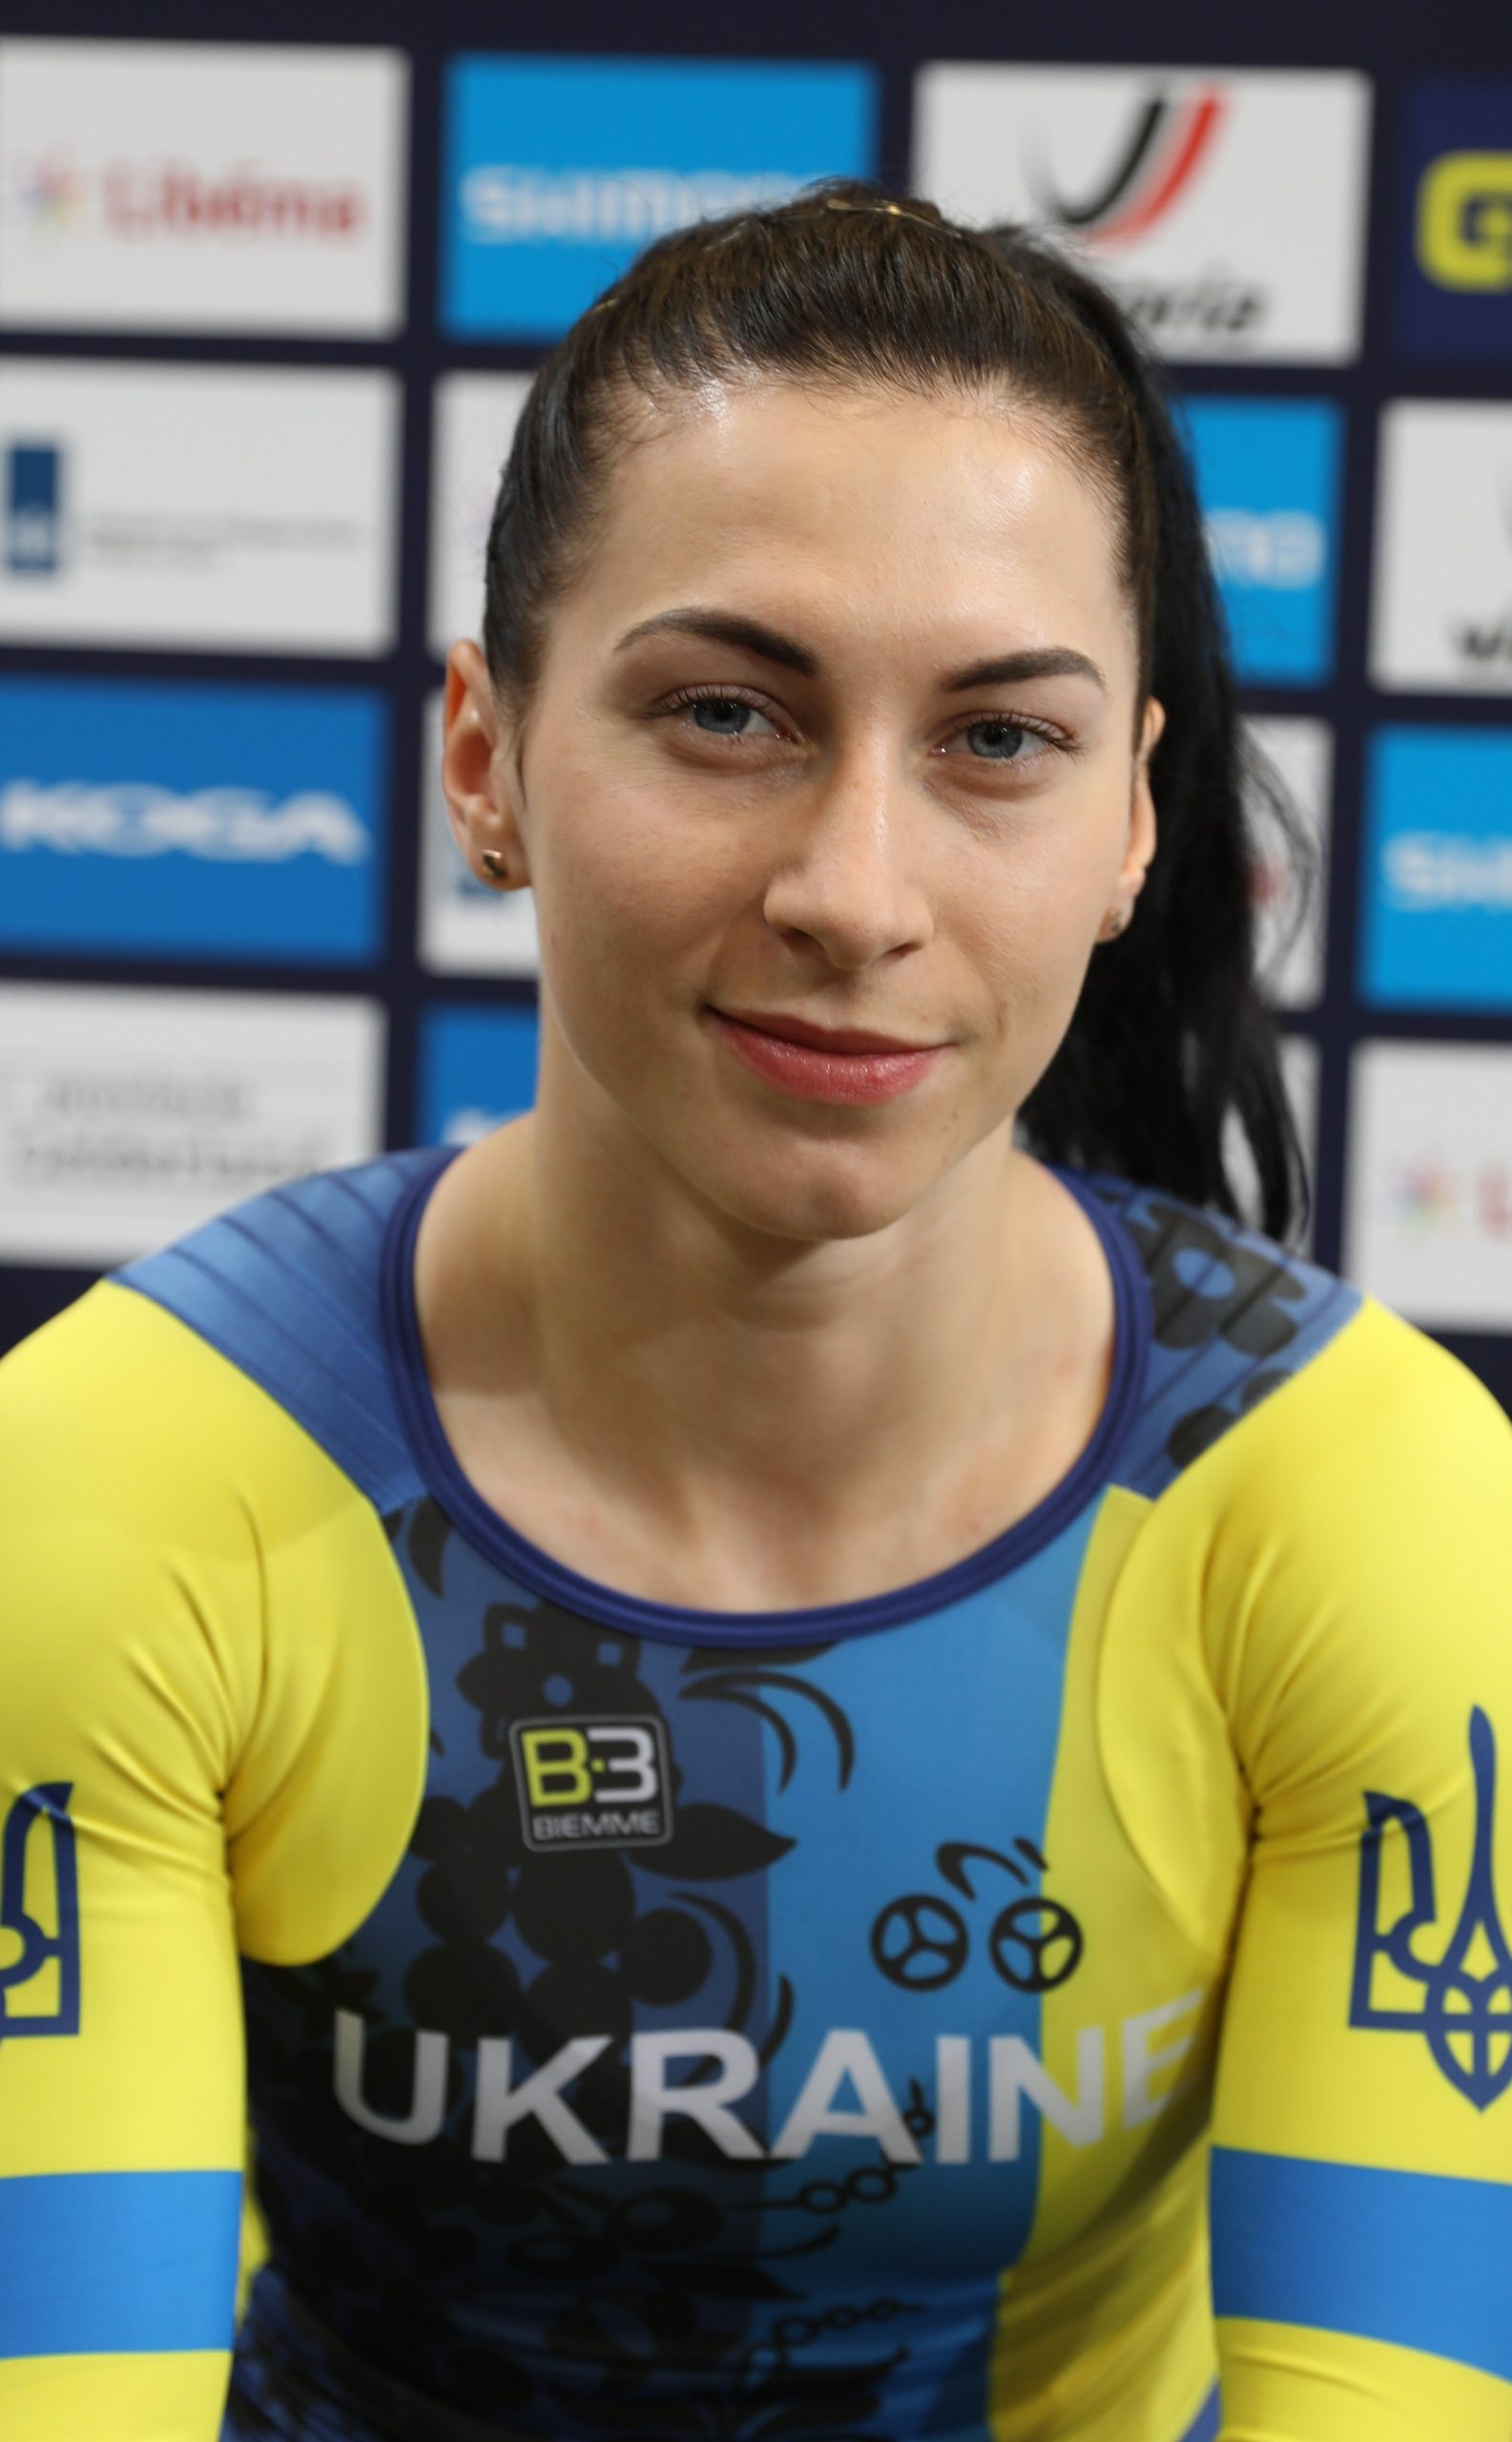 Ukraine Won the Last Silver Medal at the Olympics